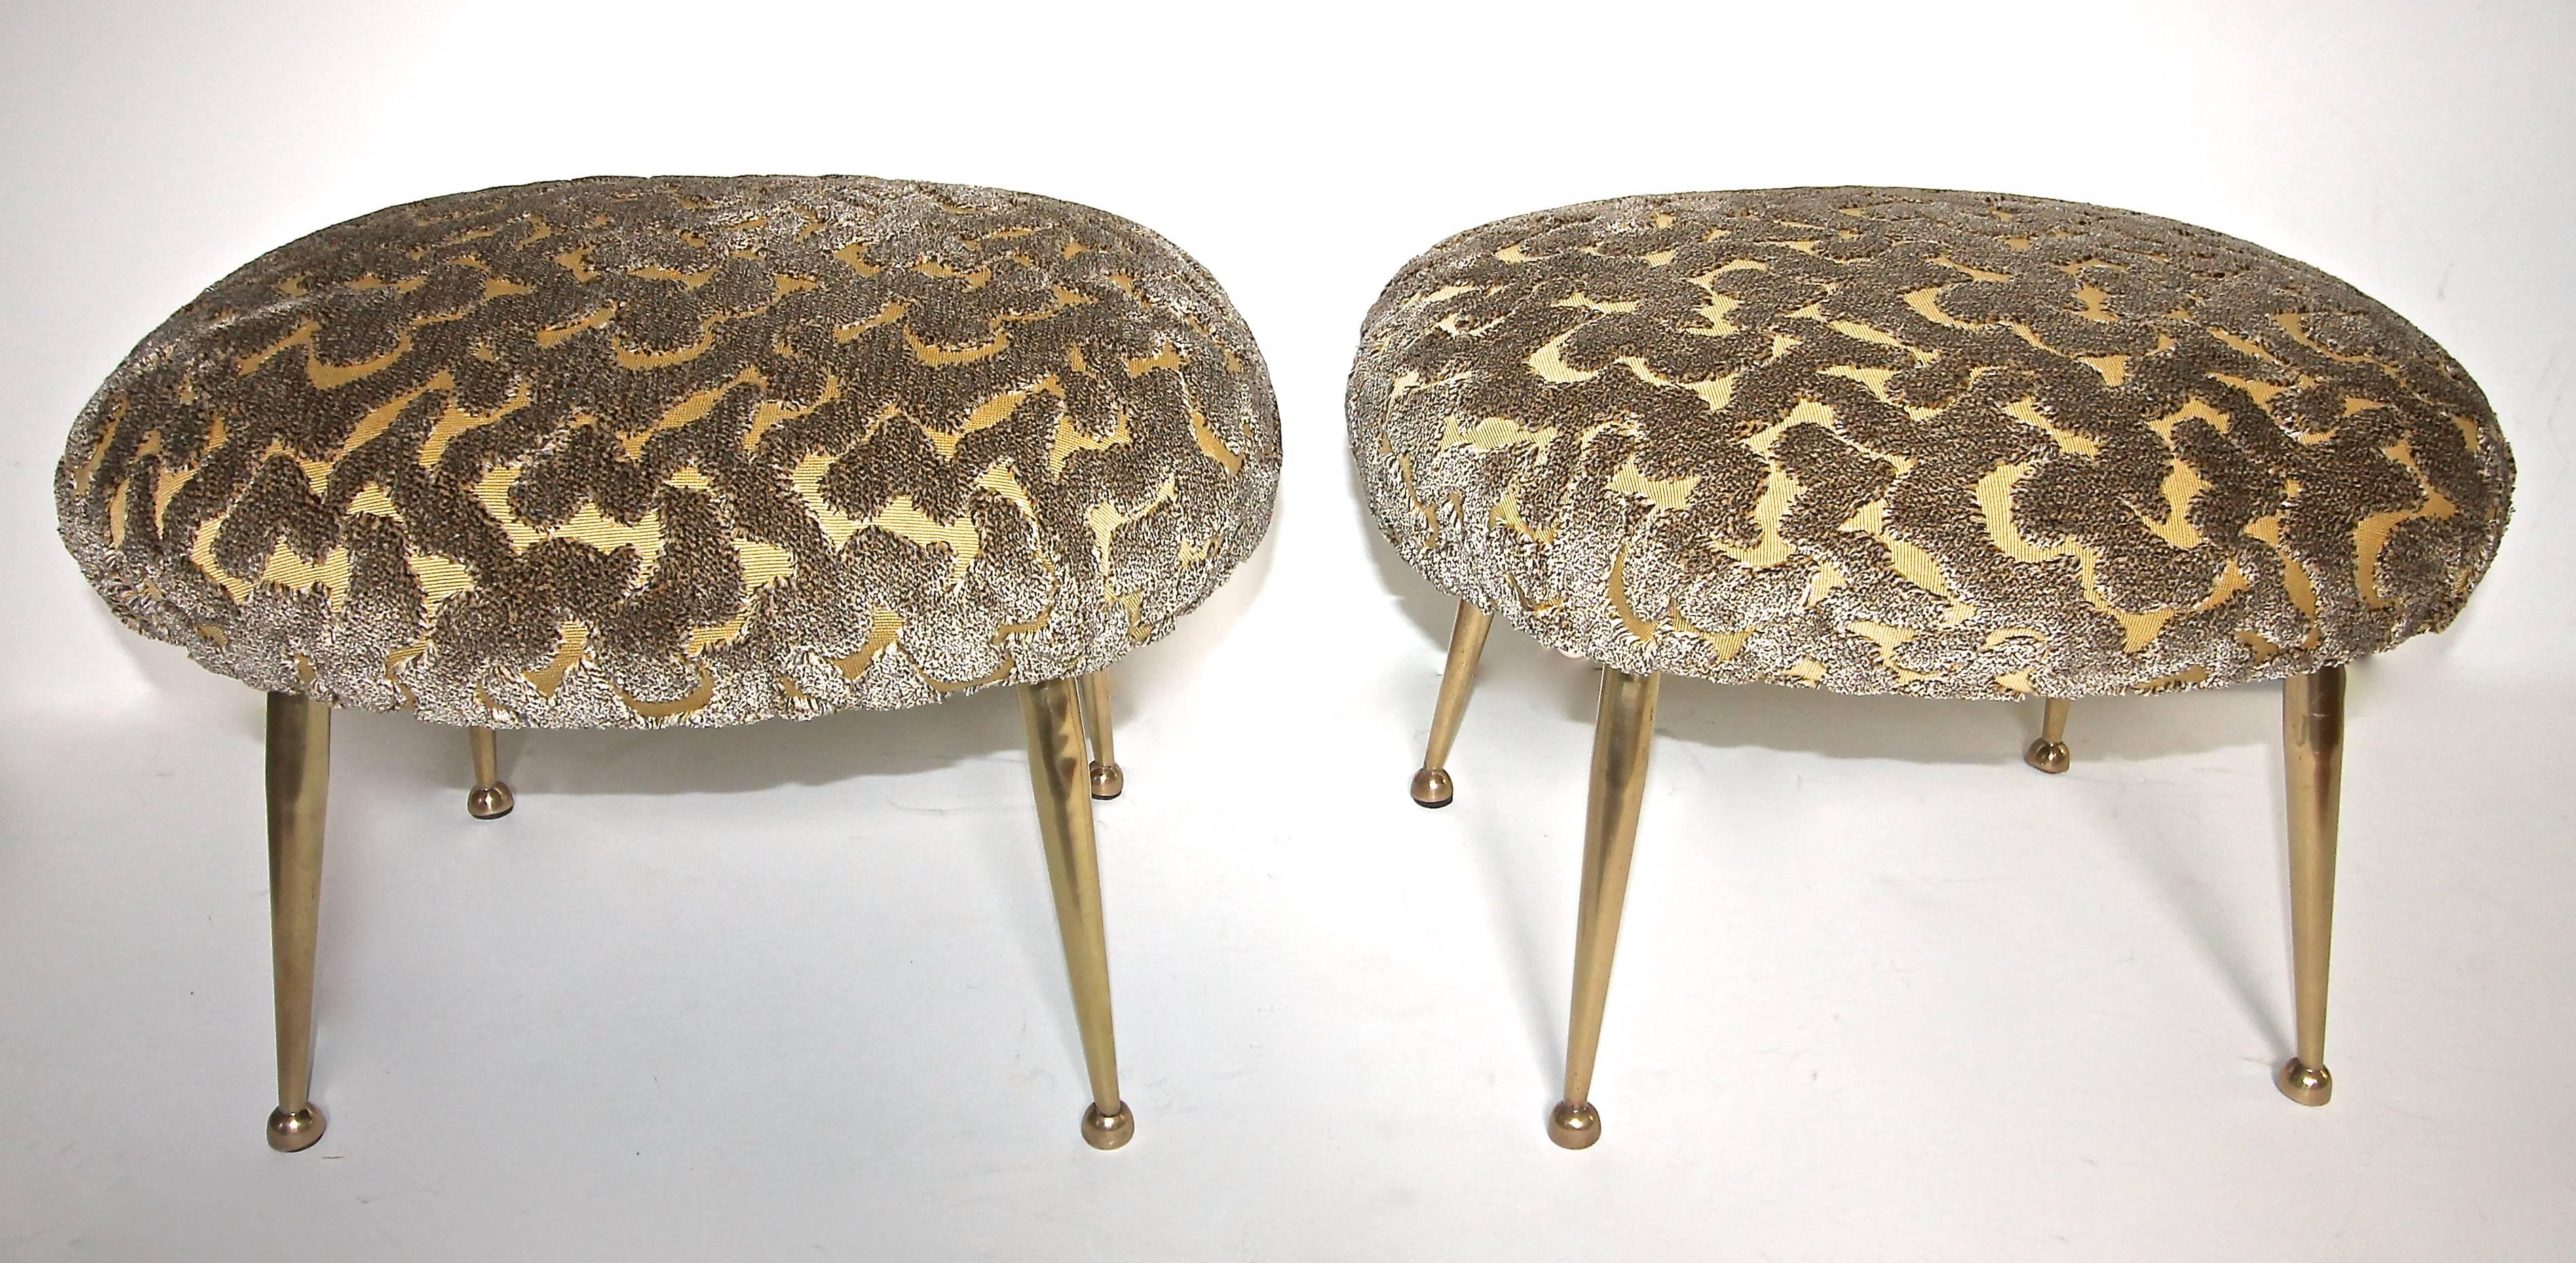 Pair of Italian upholstered brass leg footstools, attributed to Gigi Radice. Smaller scale and height. Newly covered in an Ardecora cut velvet fabric.